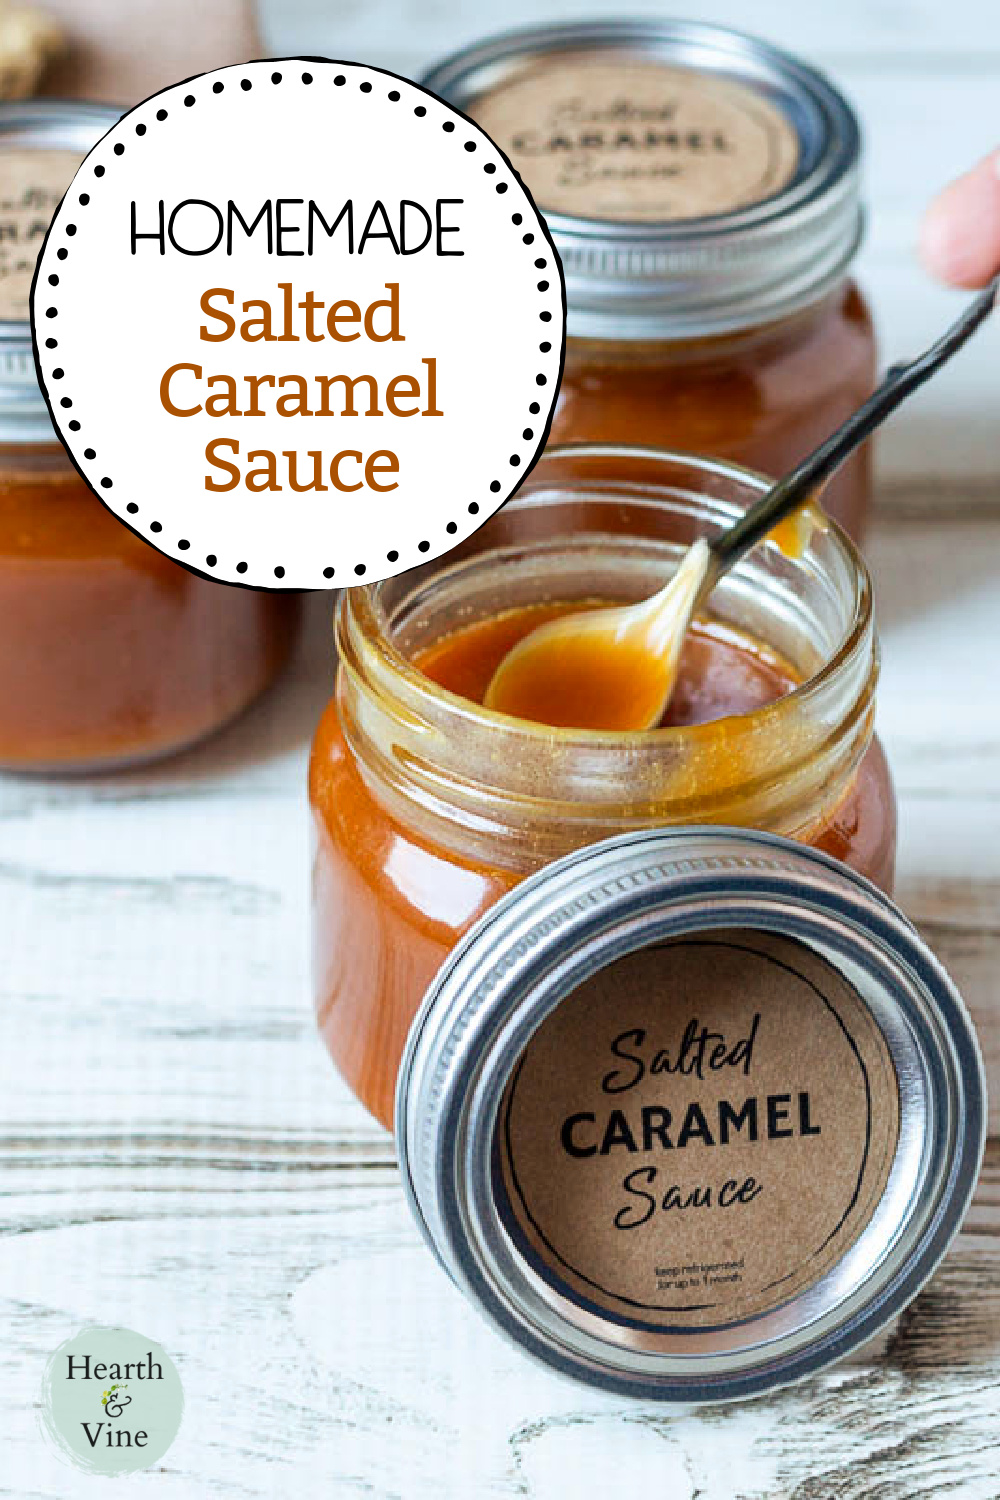 An open jar of salted caramel sauce with the lid on the side showing the label and a small spoon in the jar.